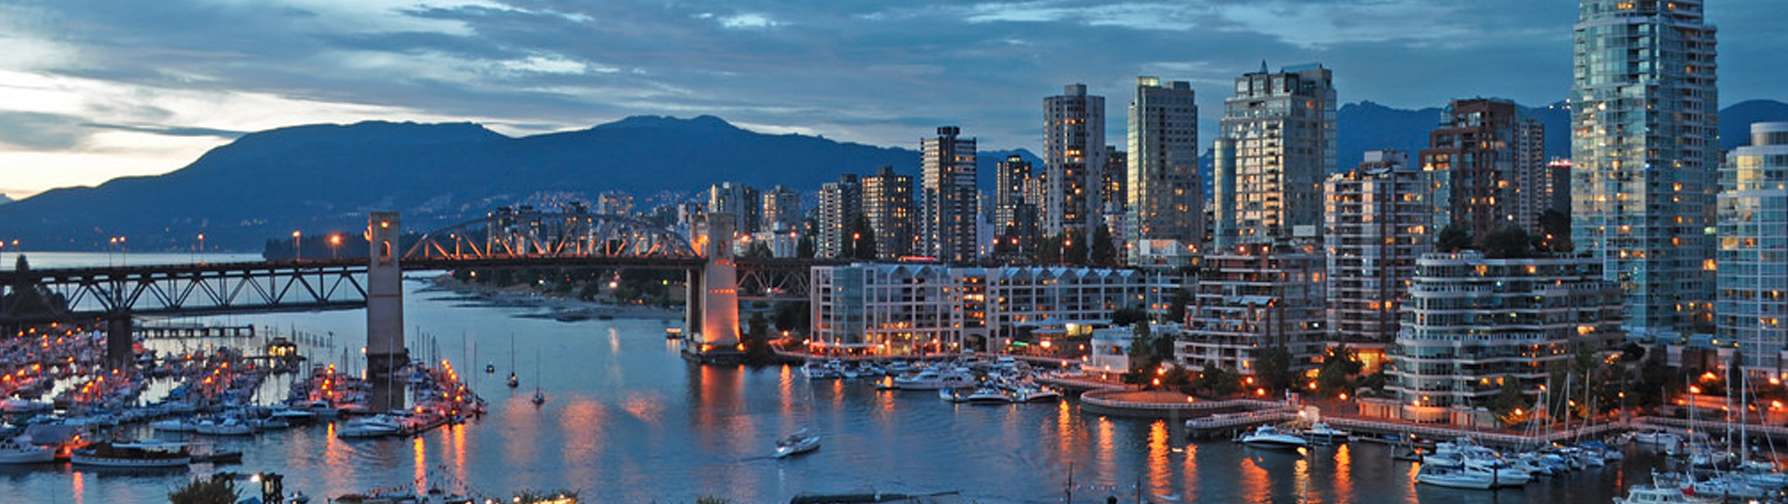 The Docks of Vancouver in British Columbia, Canada image 